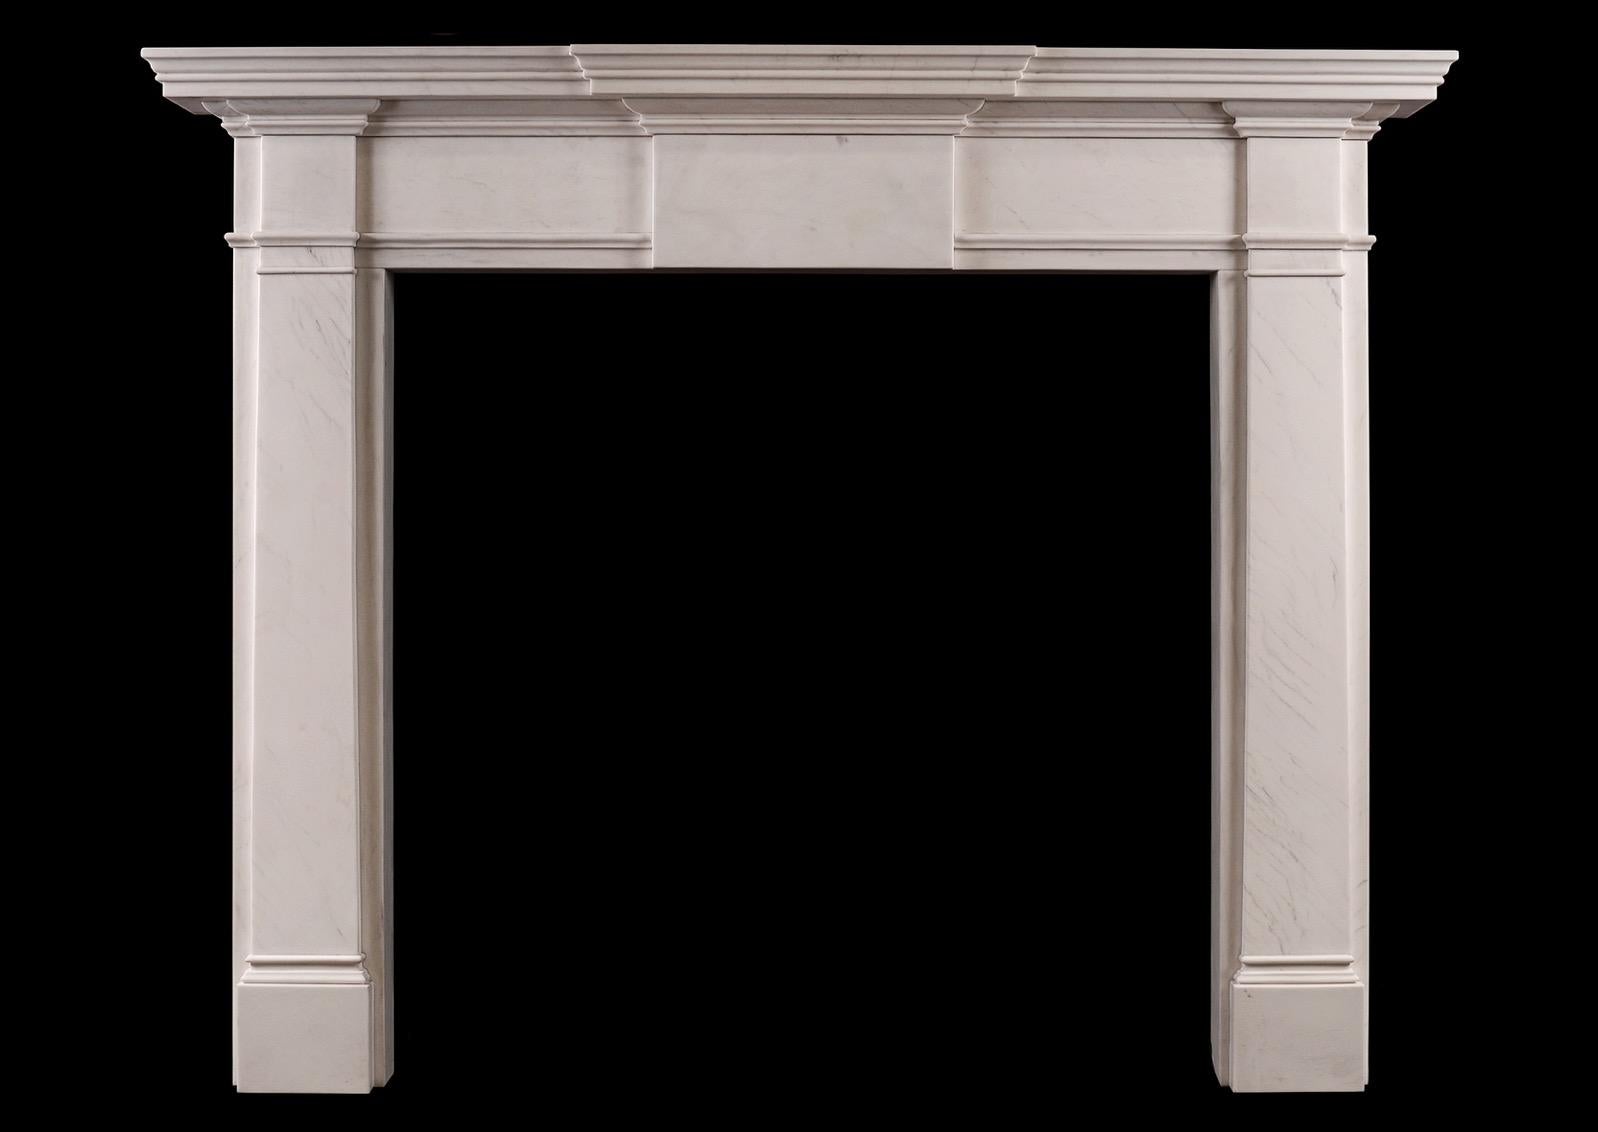 An English Georgian style fireplace. The plain jambs surmounted by scotia moulding and plain end blocks. The frieze with plain centre panel with moulded shelf above. An attractively simple model in the classical style. Modern. N.B. May be subject to